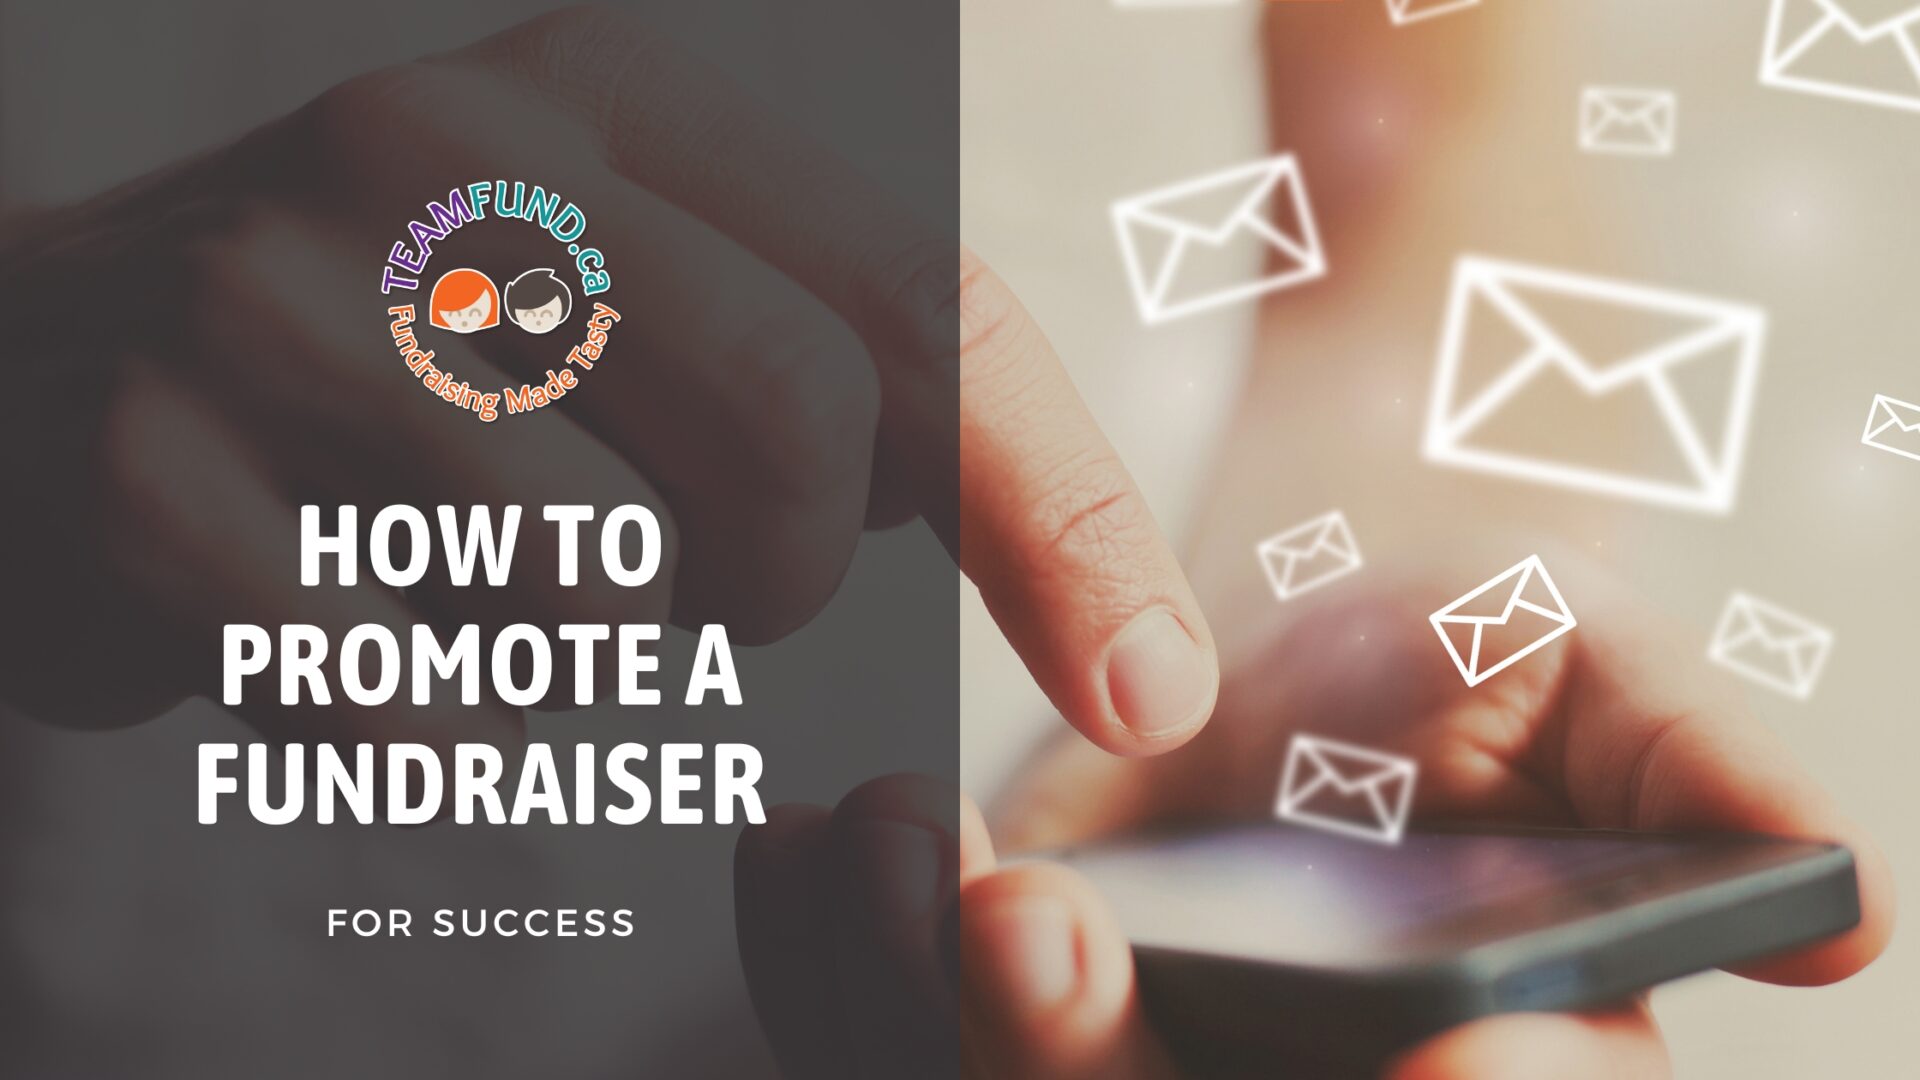 How to Promote a Fundraiser for Success